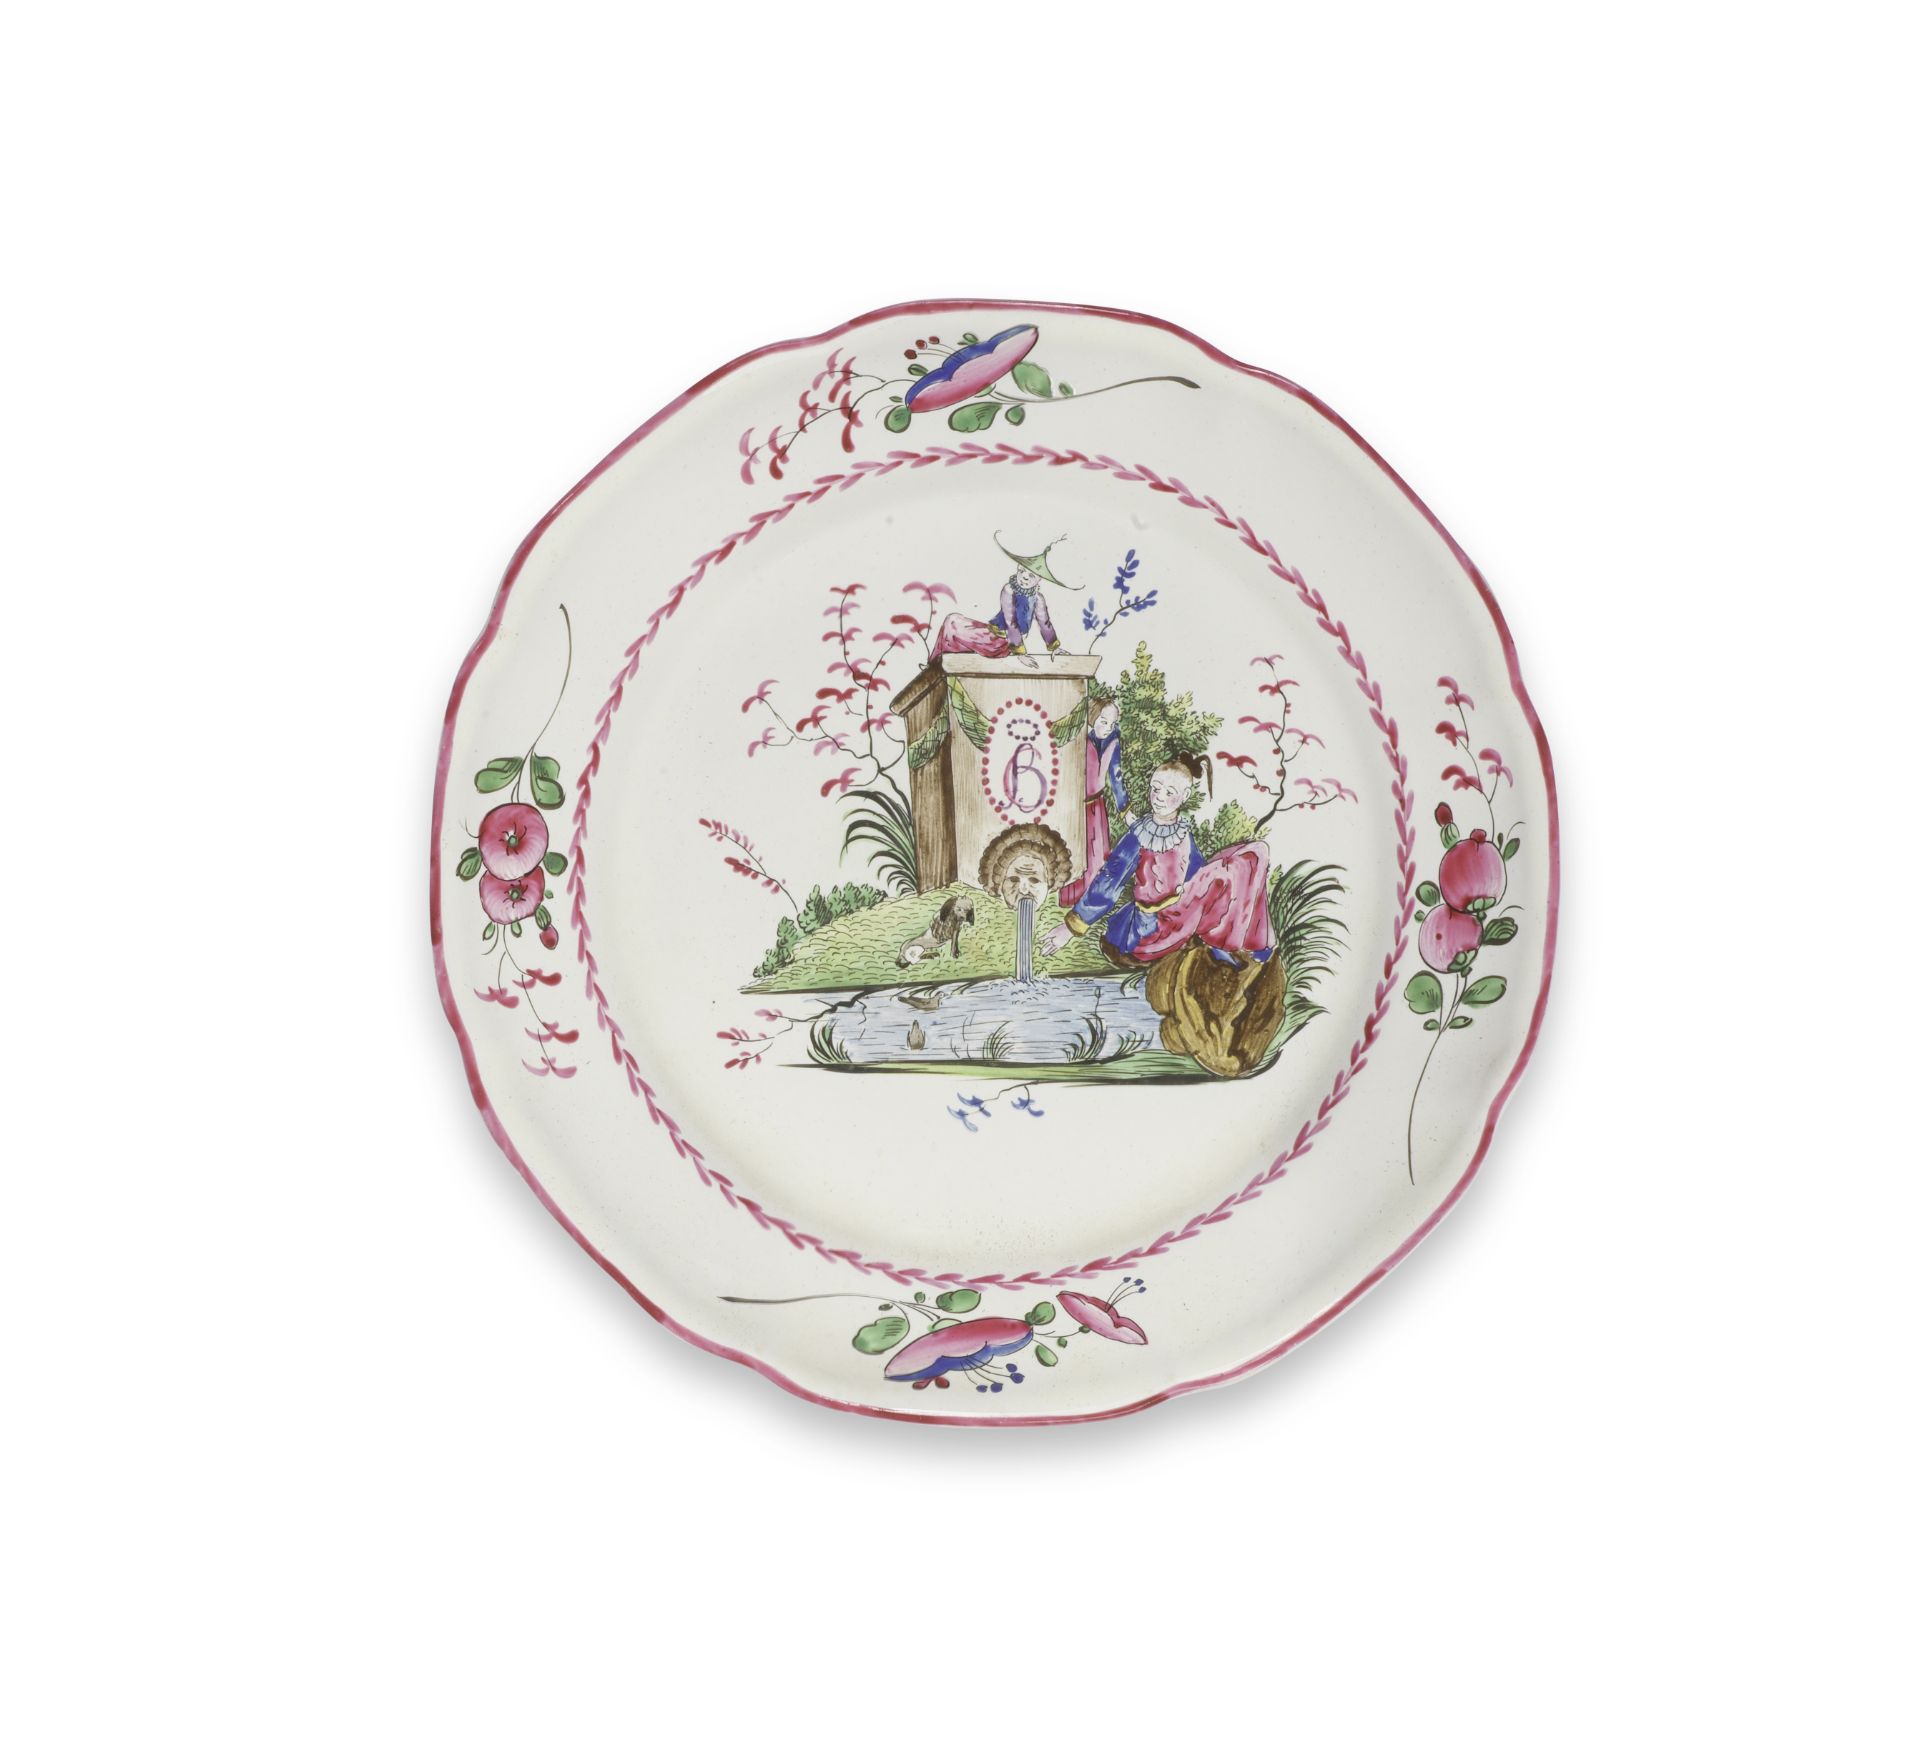 A Les Islettes faience plate, early 19th century